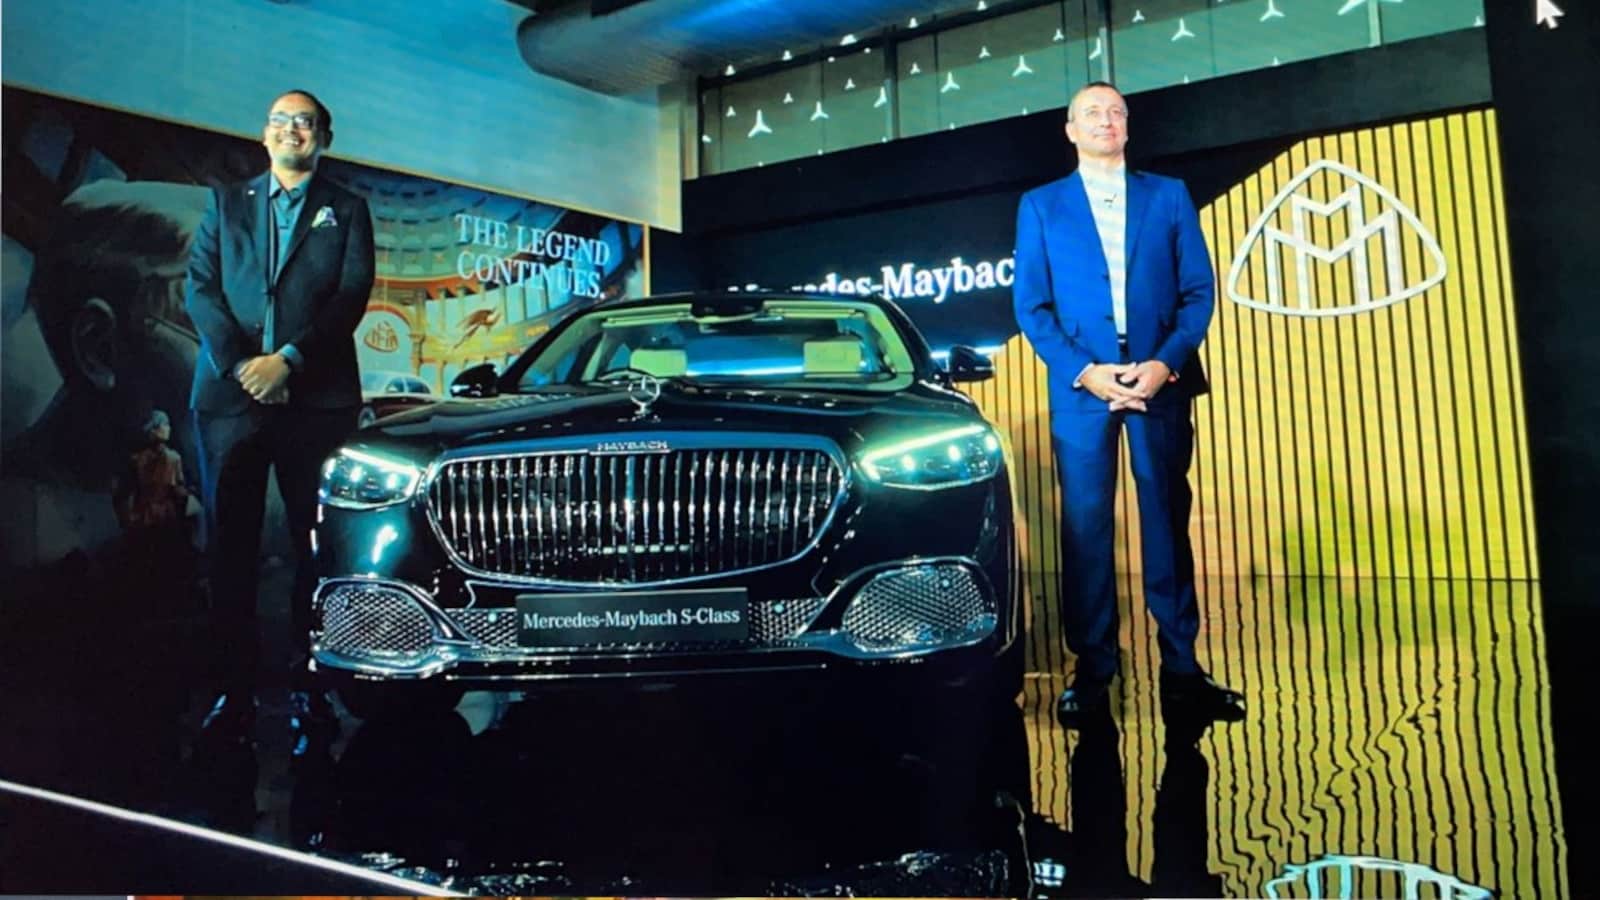 What sets Mercedes-Maybach S-Class apart from rivals?